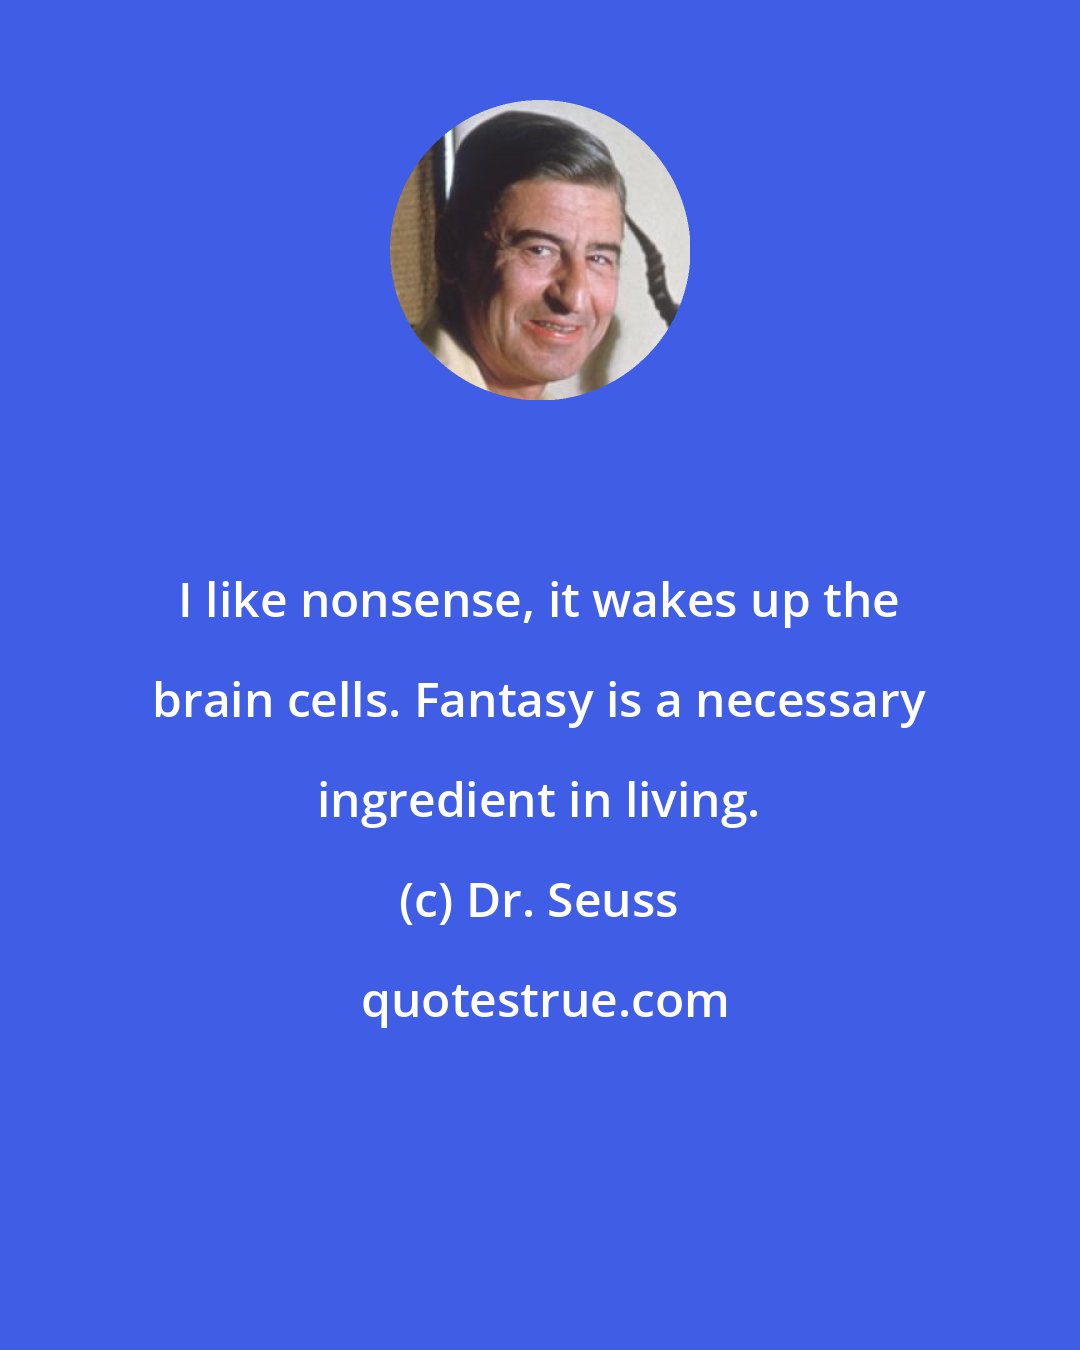 Dr. Seuss: I like nonsense, it wakes up the brain cells. Fantasy is a necessary ingredient in living.